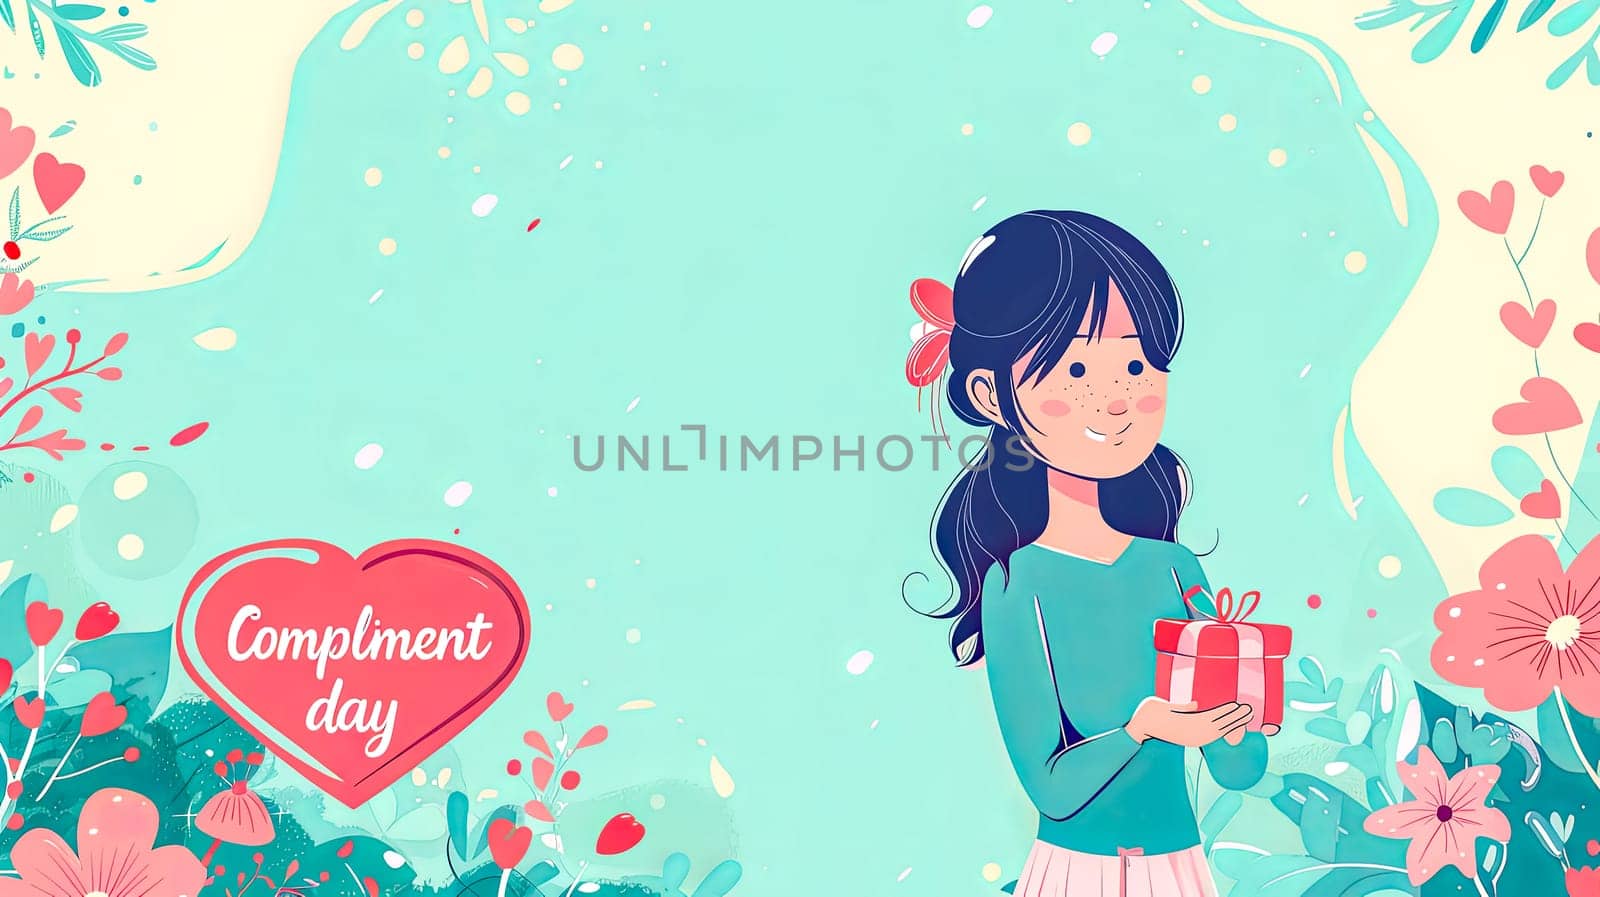 Celebrating compliment day - girl with gift by Edophoto